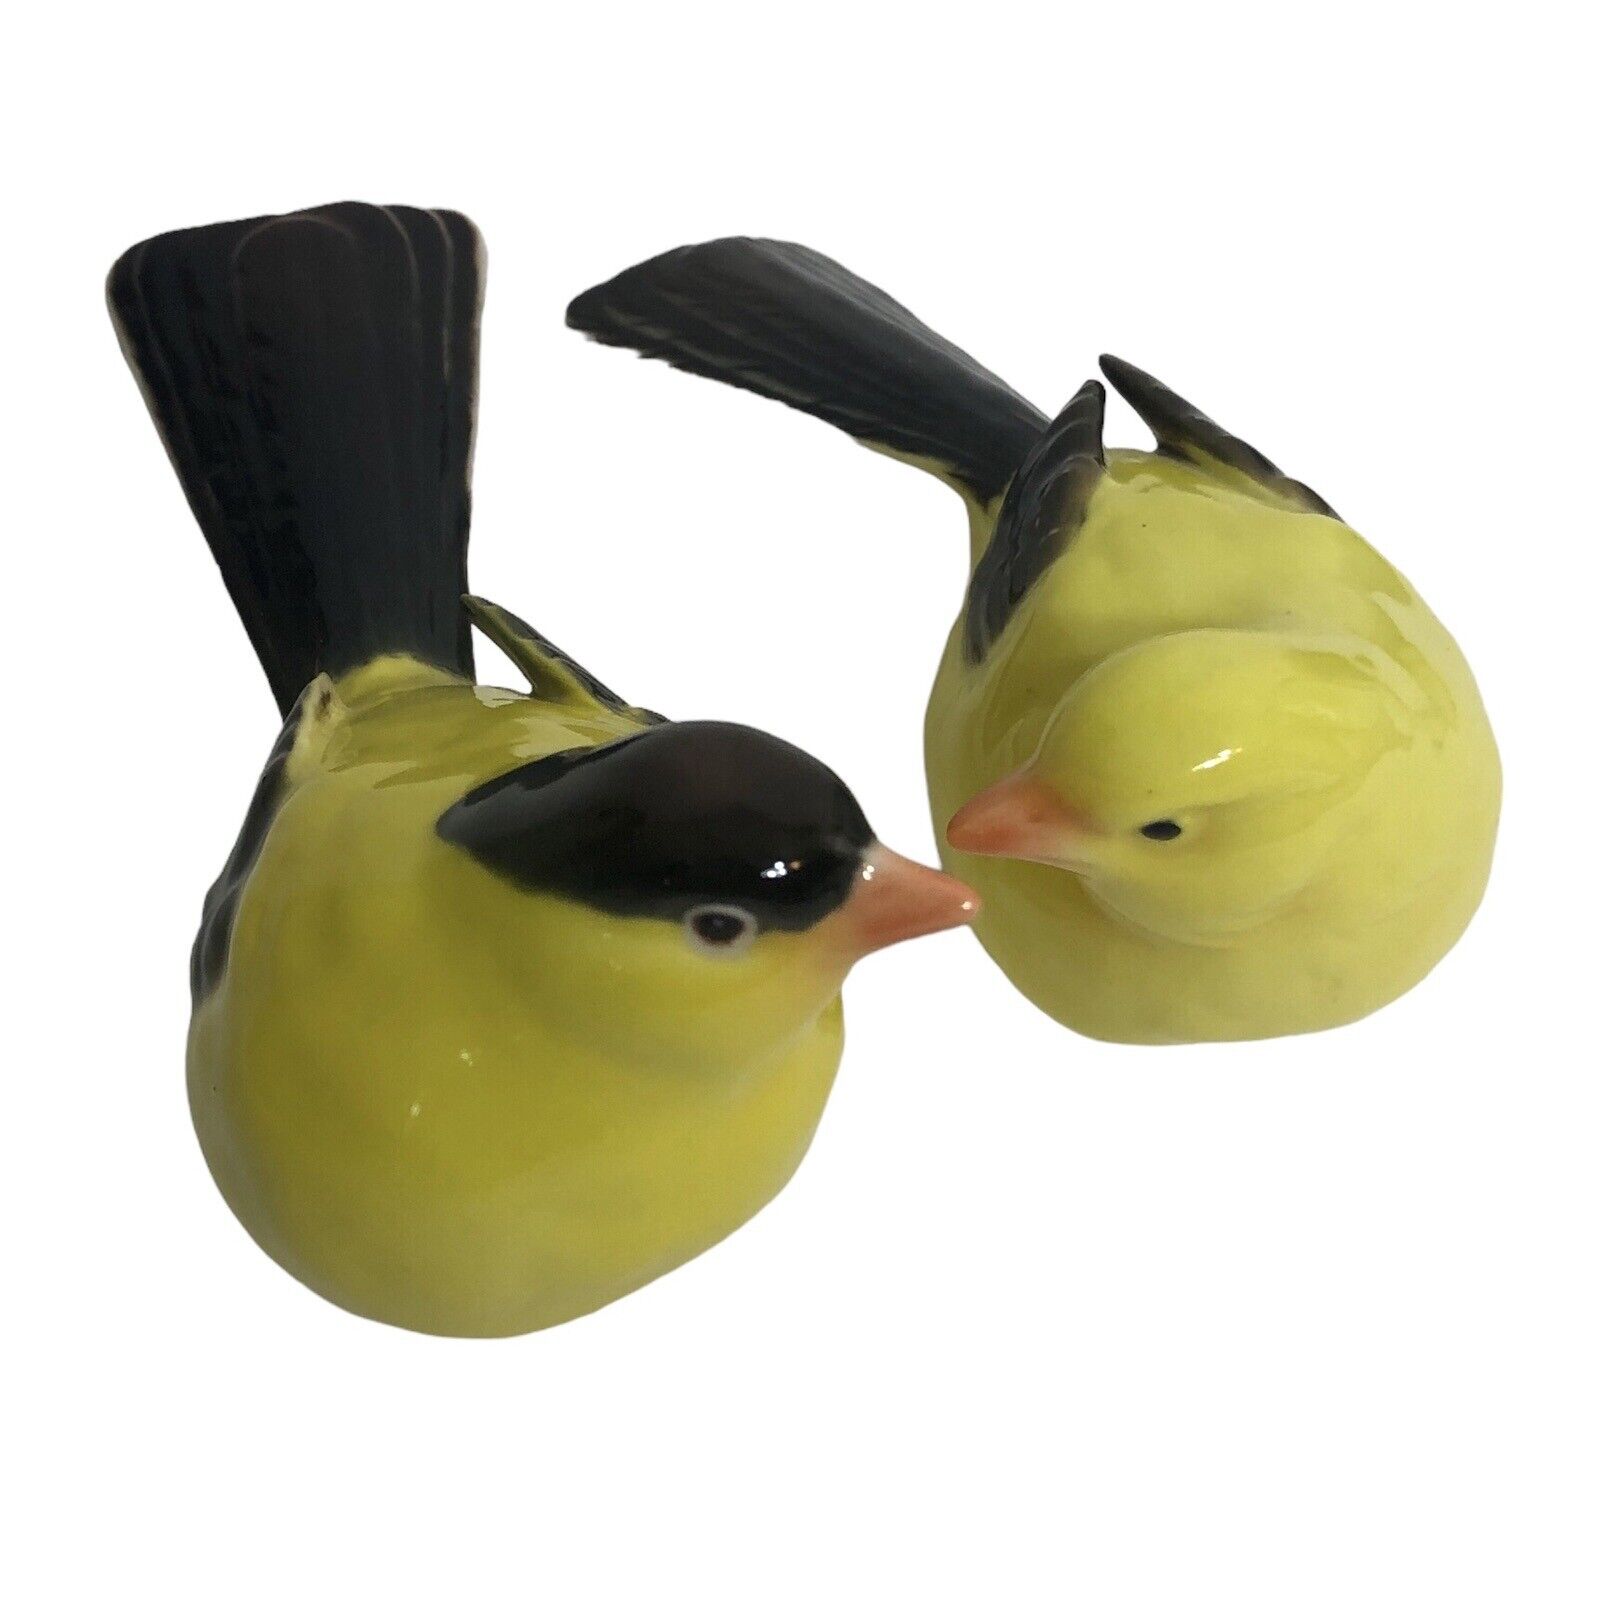 American Goldfinch Porcelain Figurines Pair Yellow and Black Birds